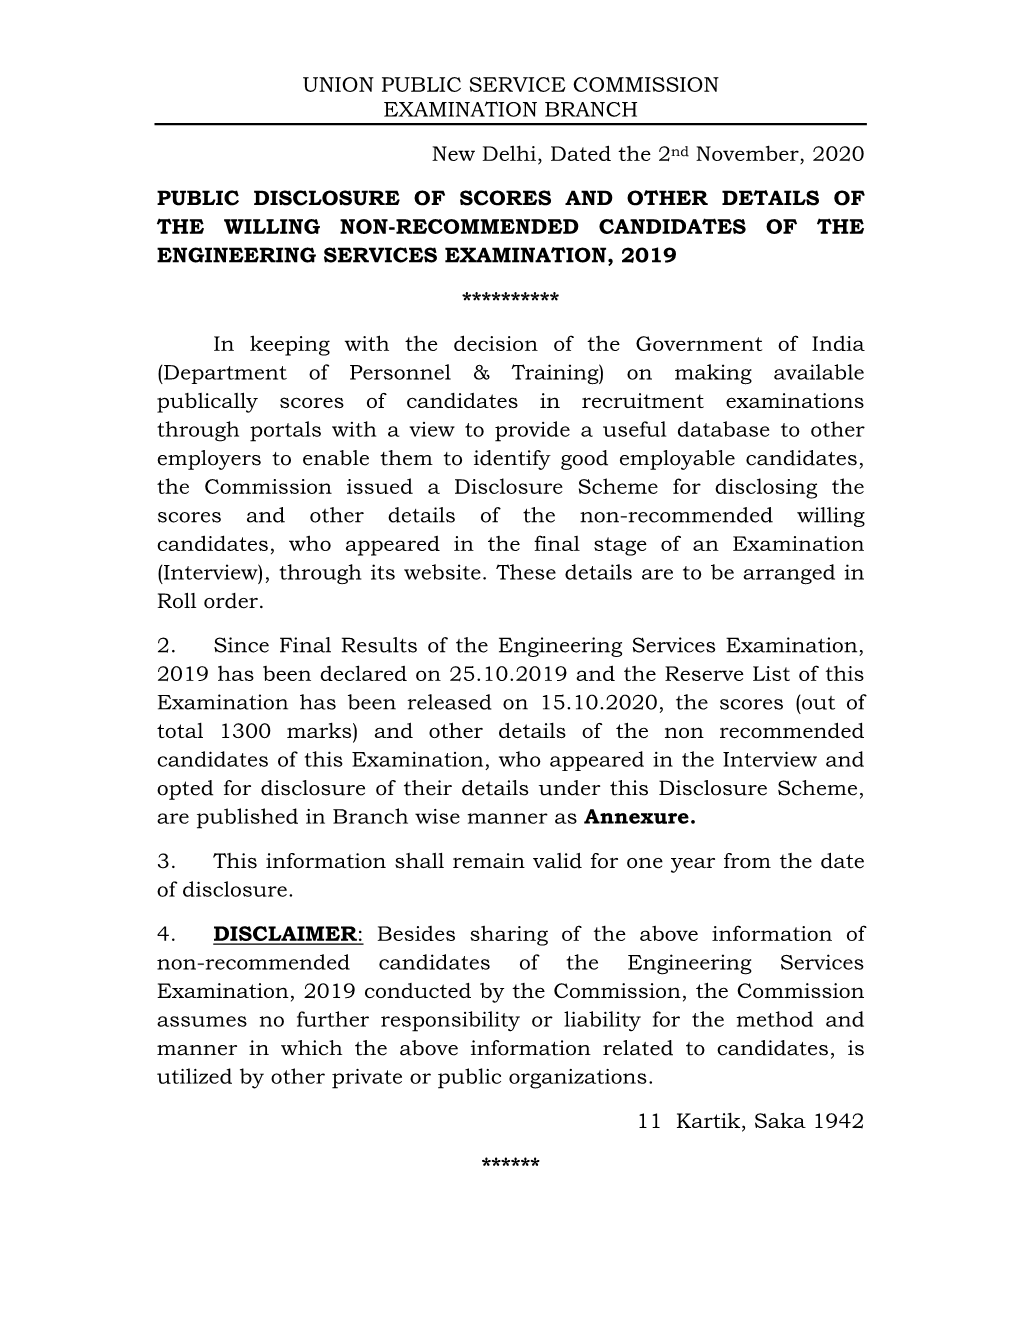 UNION PUBLIC SERVICE COMMISSION EXAMINATION BRANCH New Delhi, Dated the 2Nd November, 2020 PUBLIC DISCLOSURE of SCORES and OTHER